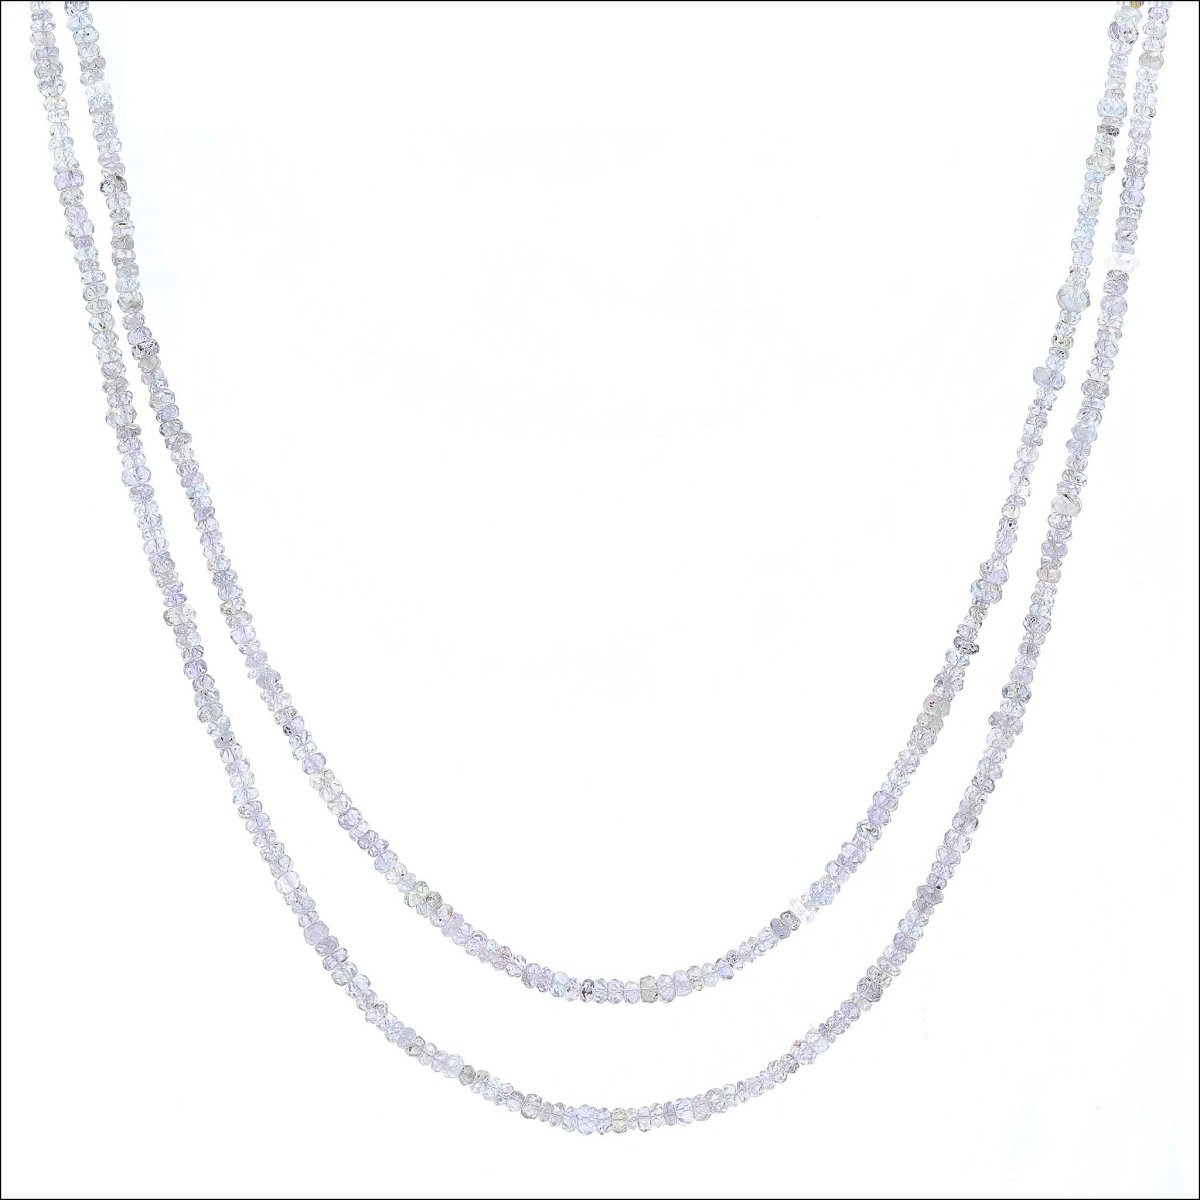 Gray Spinel Bead Strand Necklace 14KW 52.5" - JewelsmithNecklaces